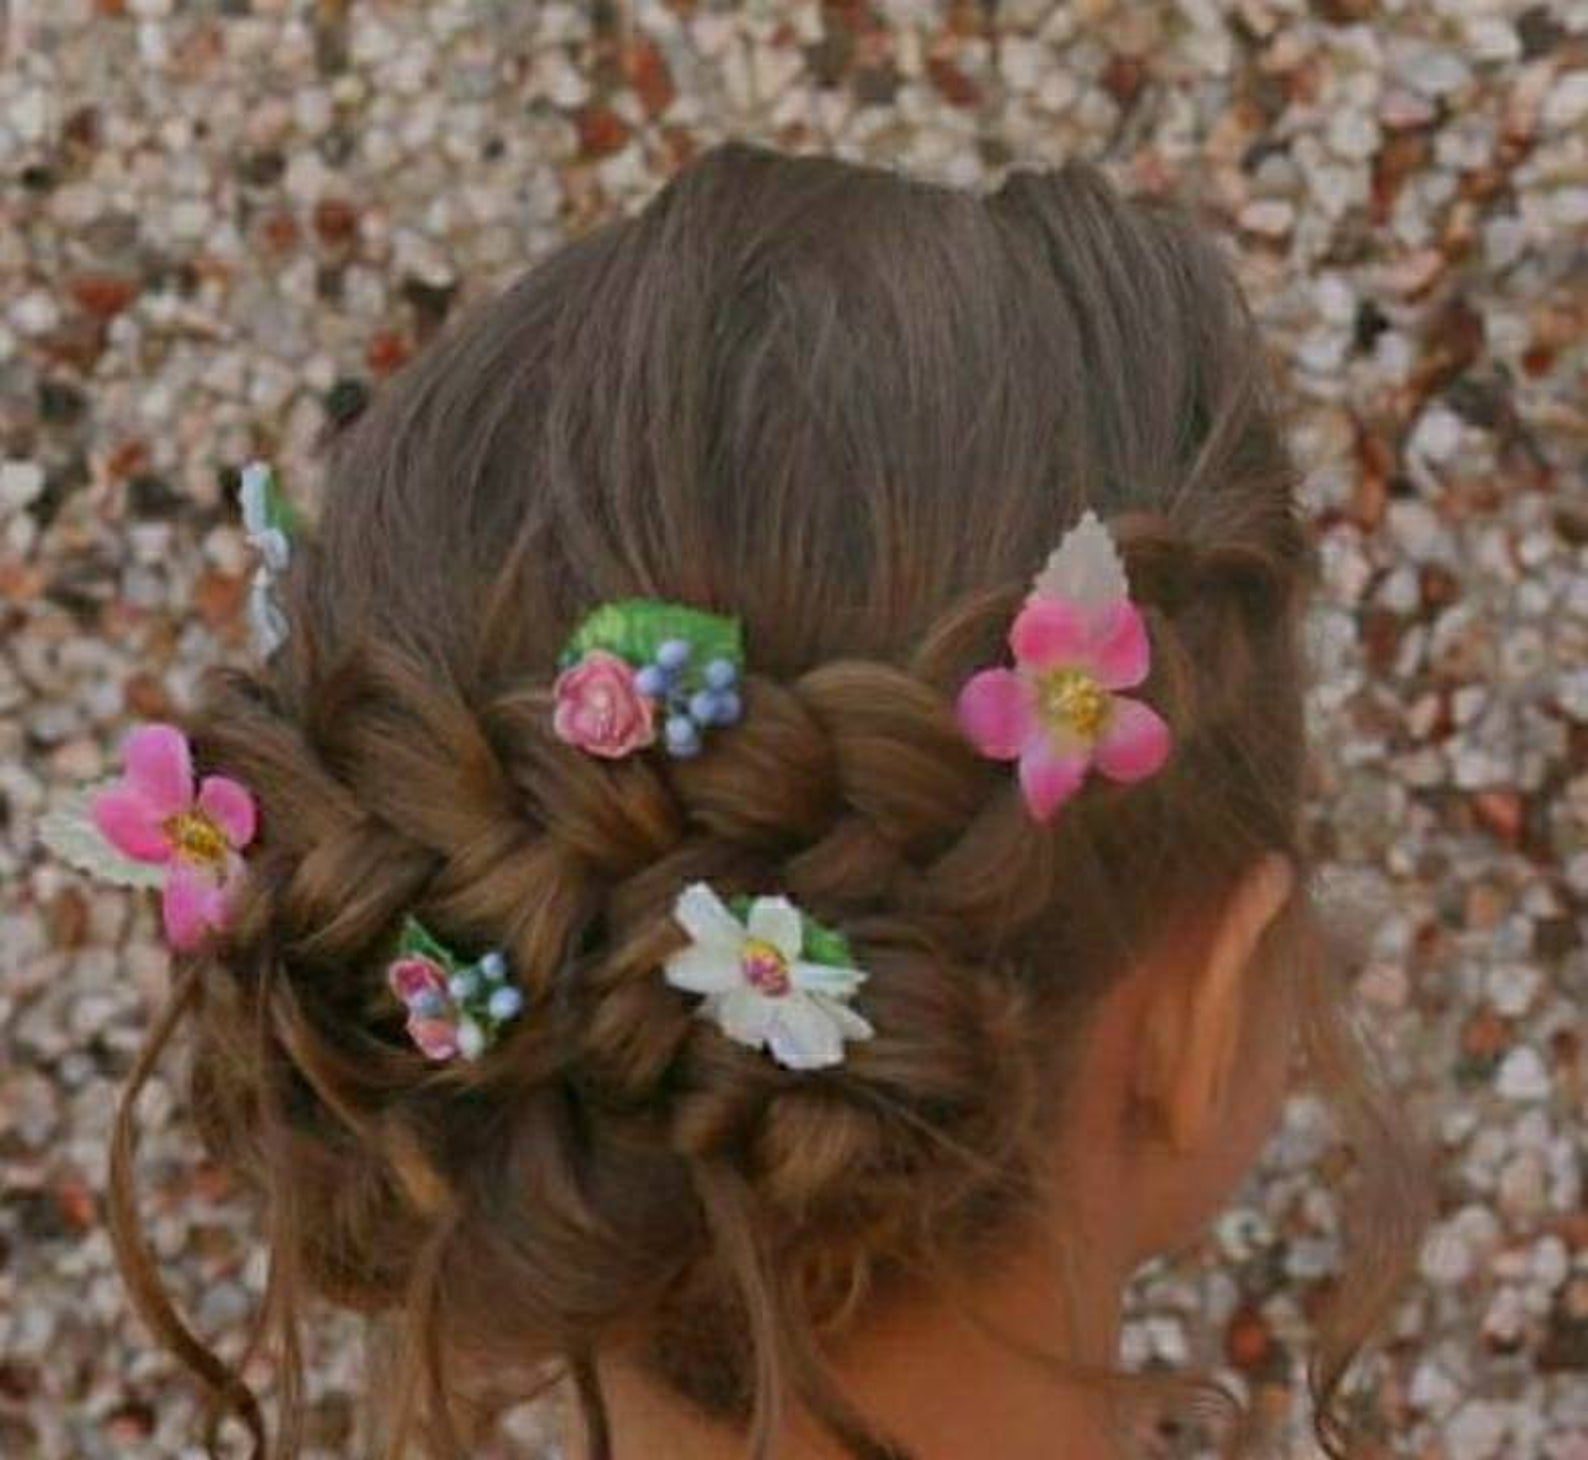 Hand Crafted Flower Hair Clips - floral pins - Flower Crown Magic